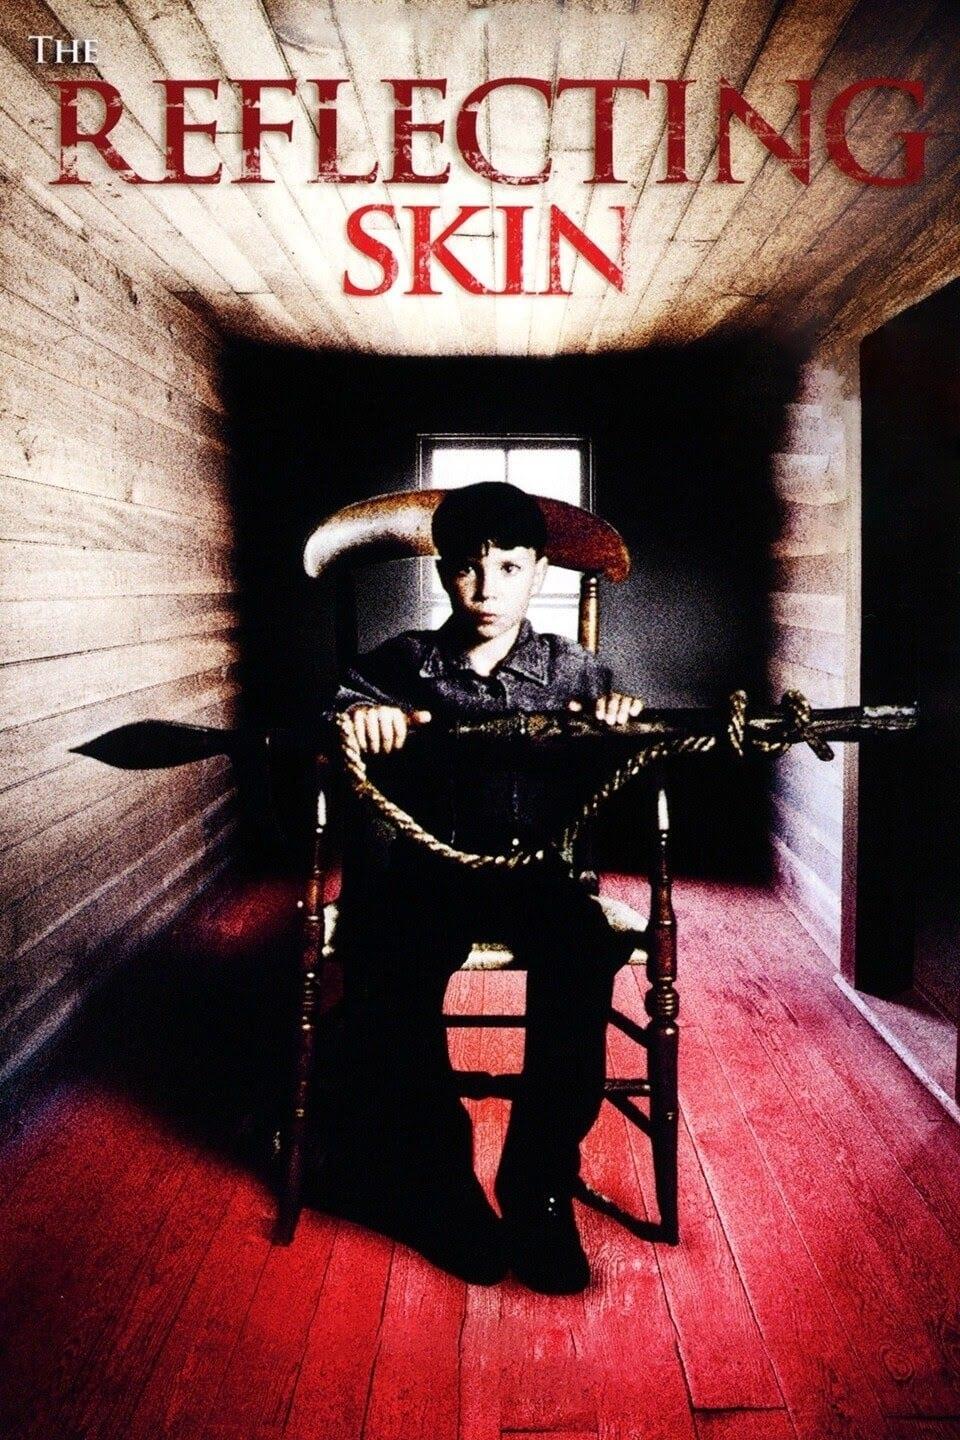 The Reflecting Skin poster